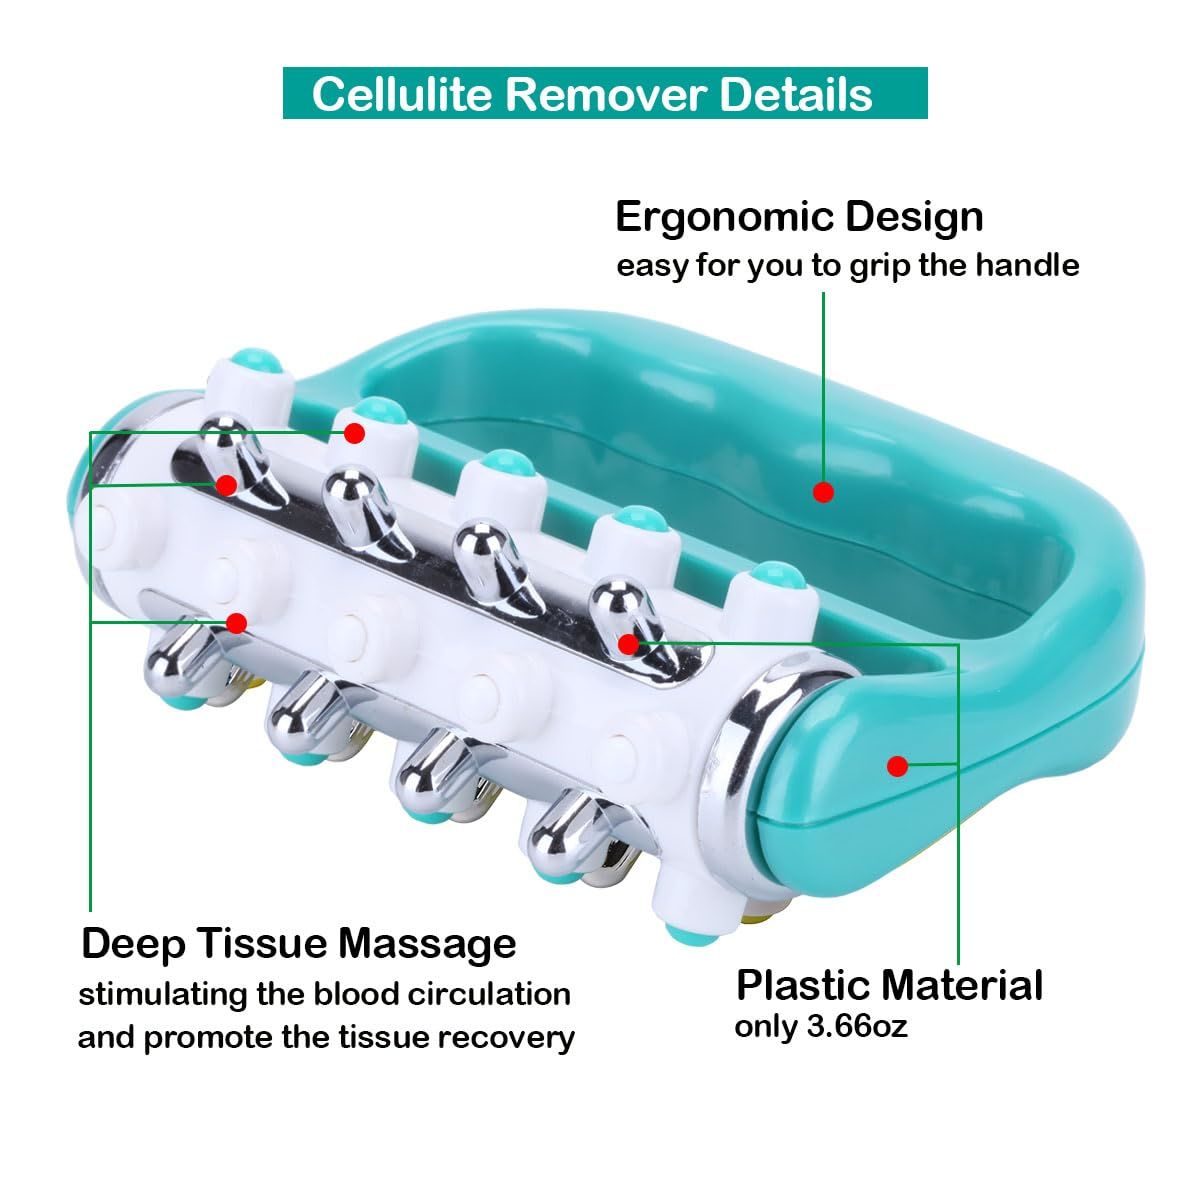 Cellulite Massager/ Release And Muscle Massage Roller/ Mini Trigger Point Deep Tissue Myofascial Release Tool